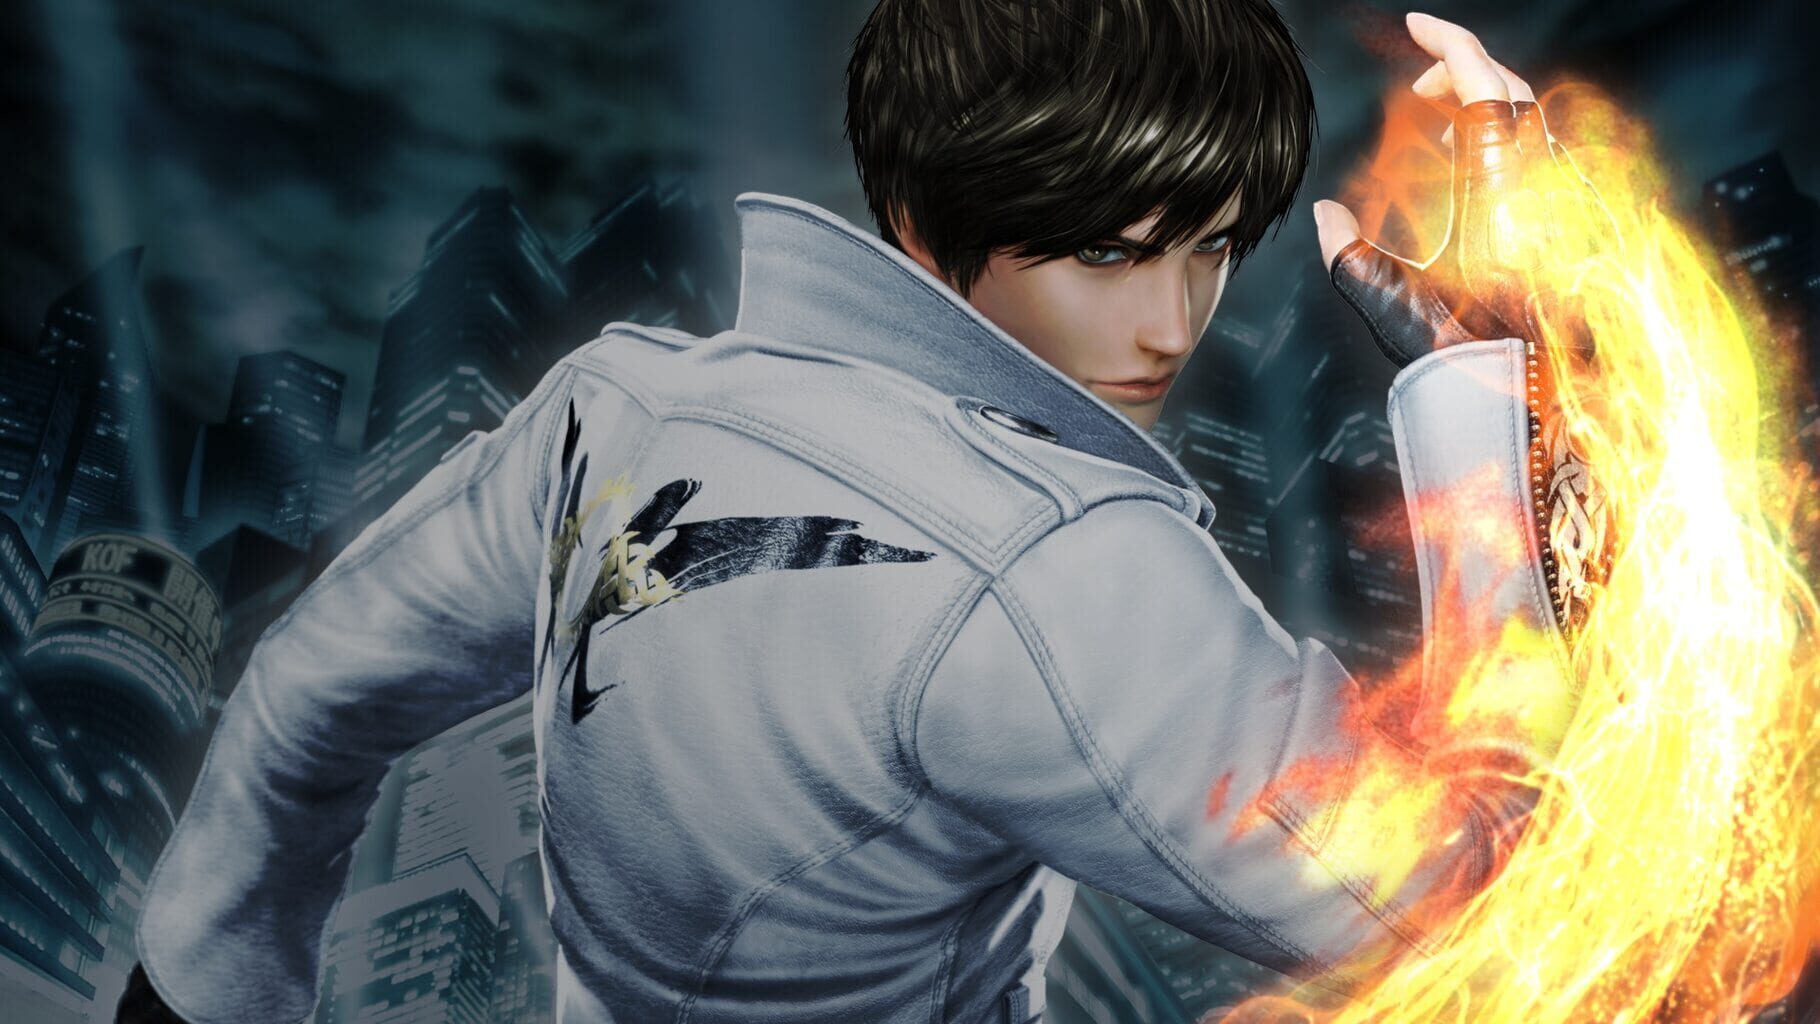 Artwork for The King of Fighters XIV